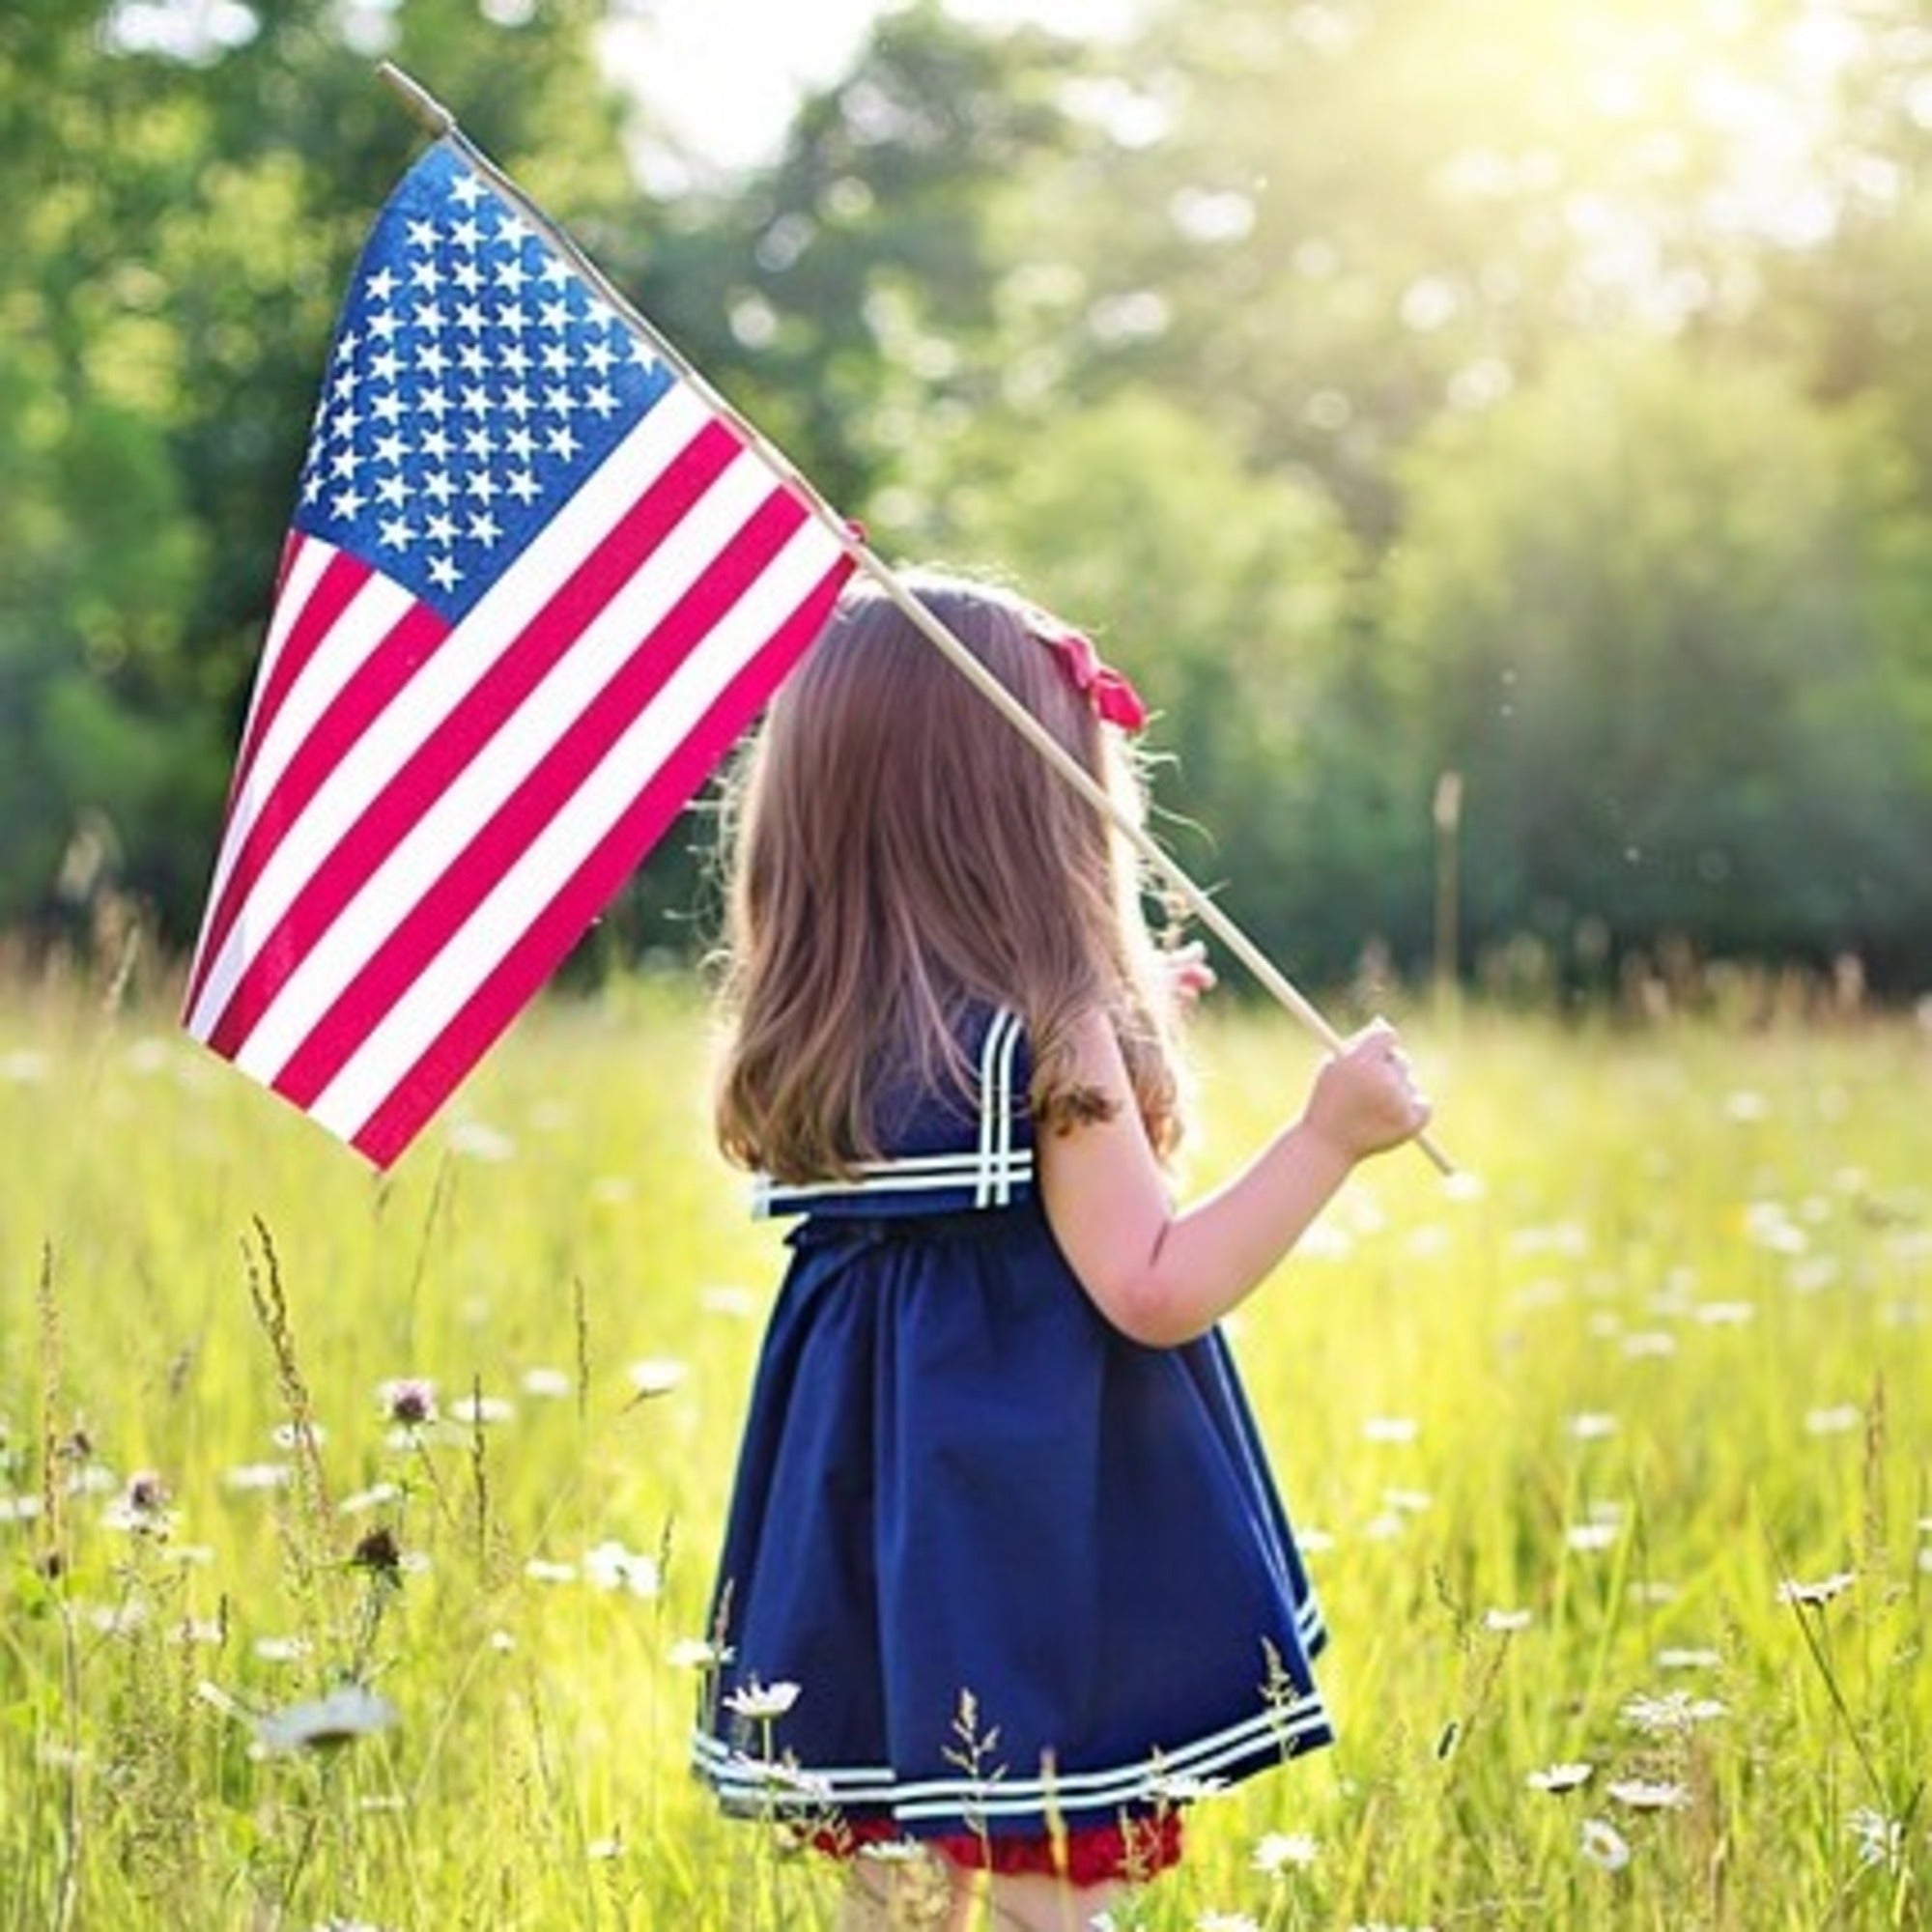 7 Unique Gift Ideas for Americans to Celebrate Independence Day